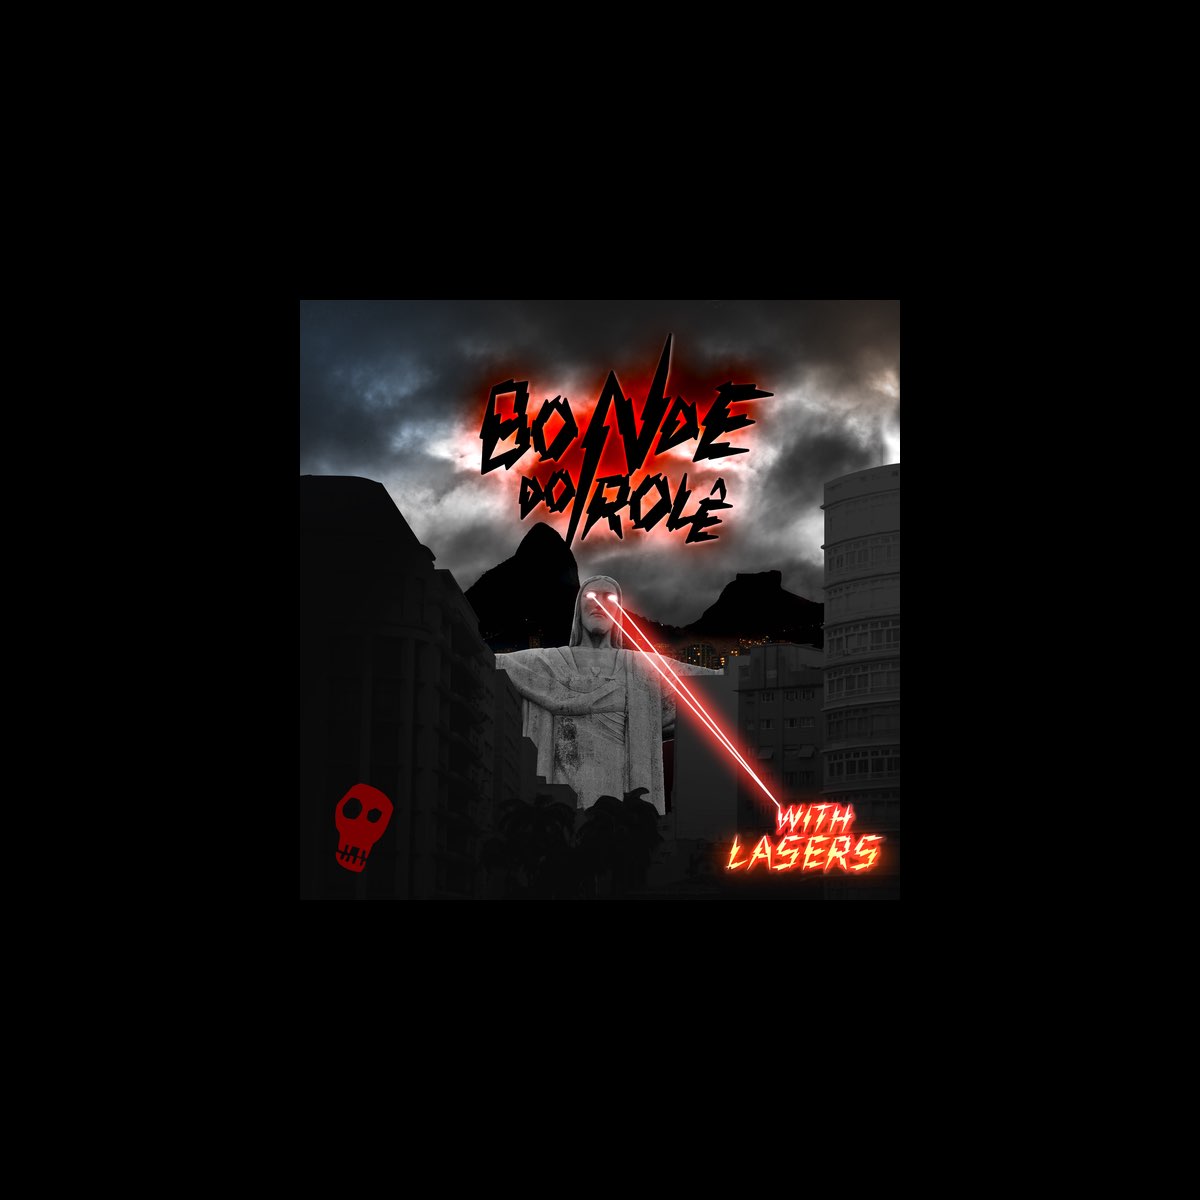 Bonde do Role With Lasers by Bonde do Rolê on Apple Music